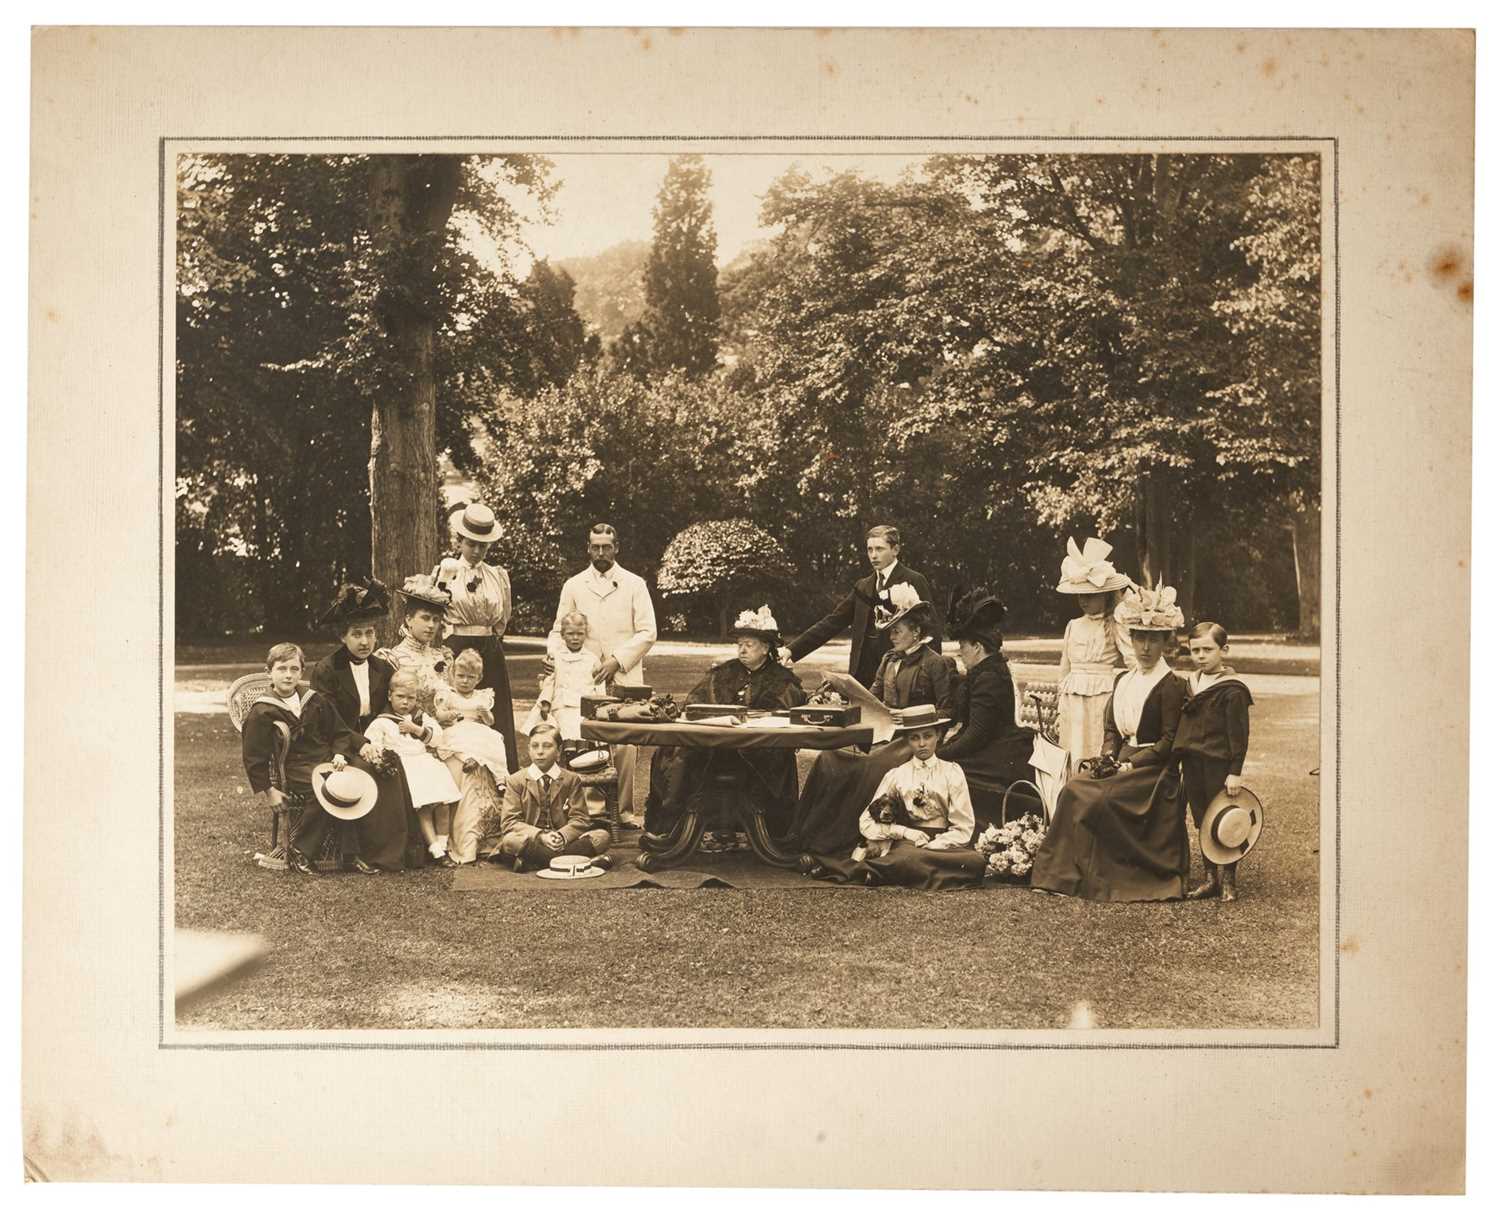 Lot 20 - H.M.Queen Victoria and family, fine silver gelatine photograph of the Queen and her family taken in the garden at Osborne in 1898 including three future Kings of England, mounted on card 24 x 30cm...